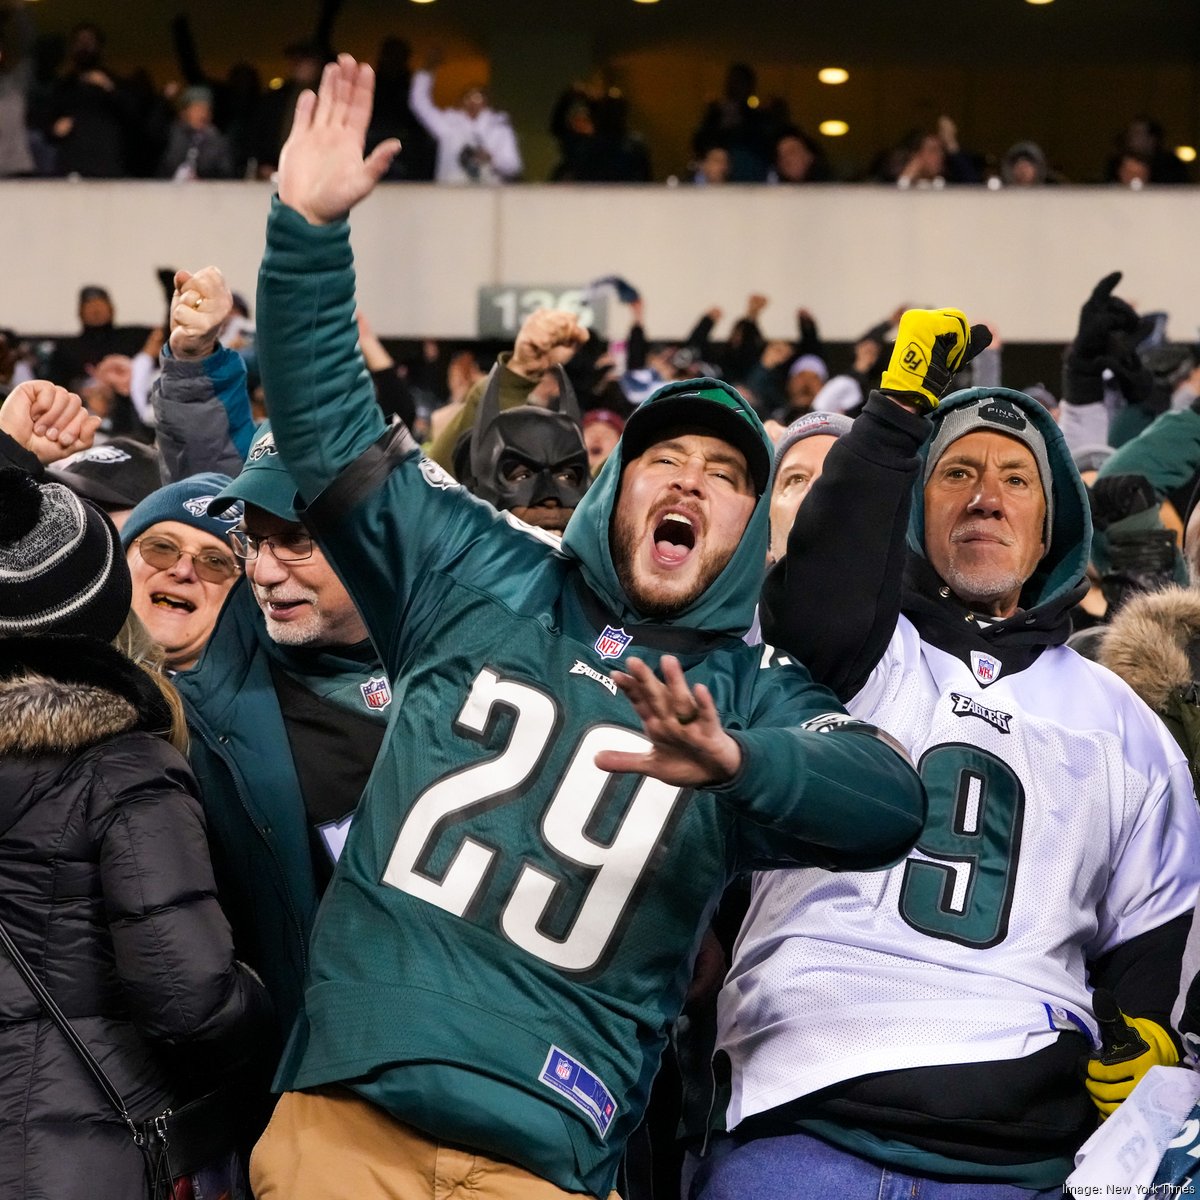 Eagles-49ers ticket prices at record levels with seats as high as $11,000 -  Philadelphia Business Journal